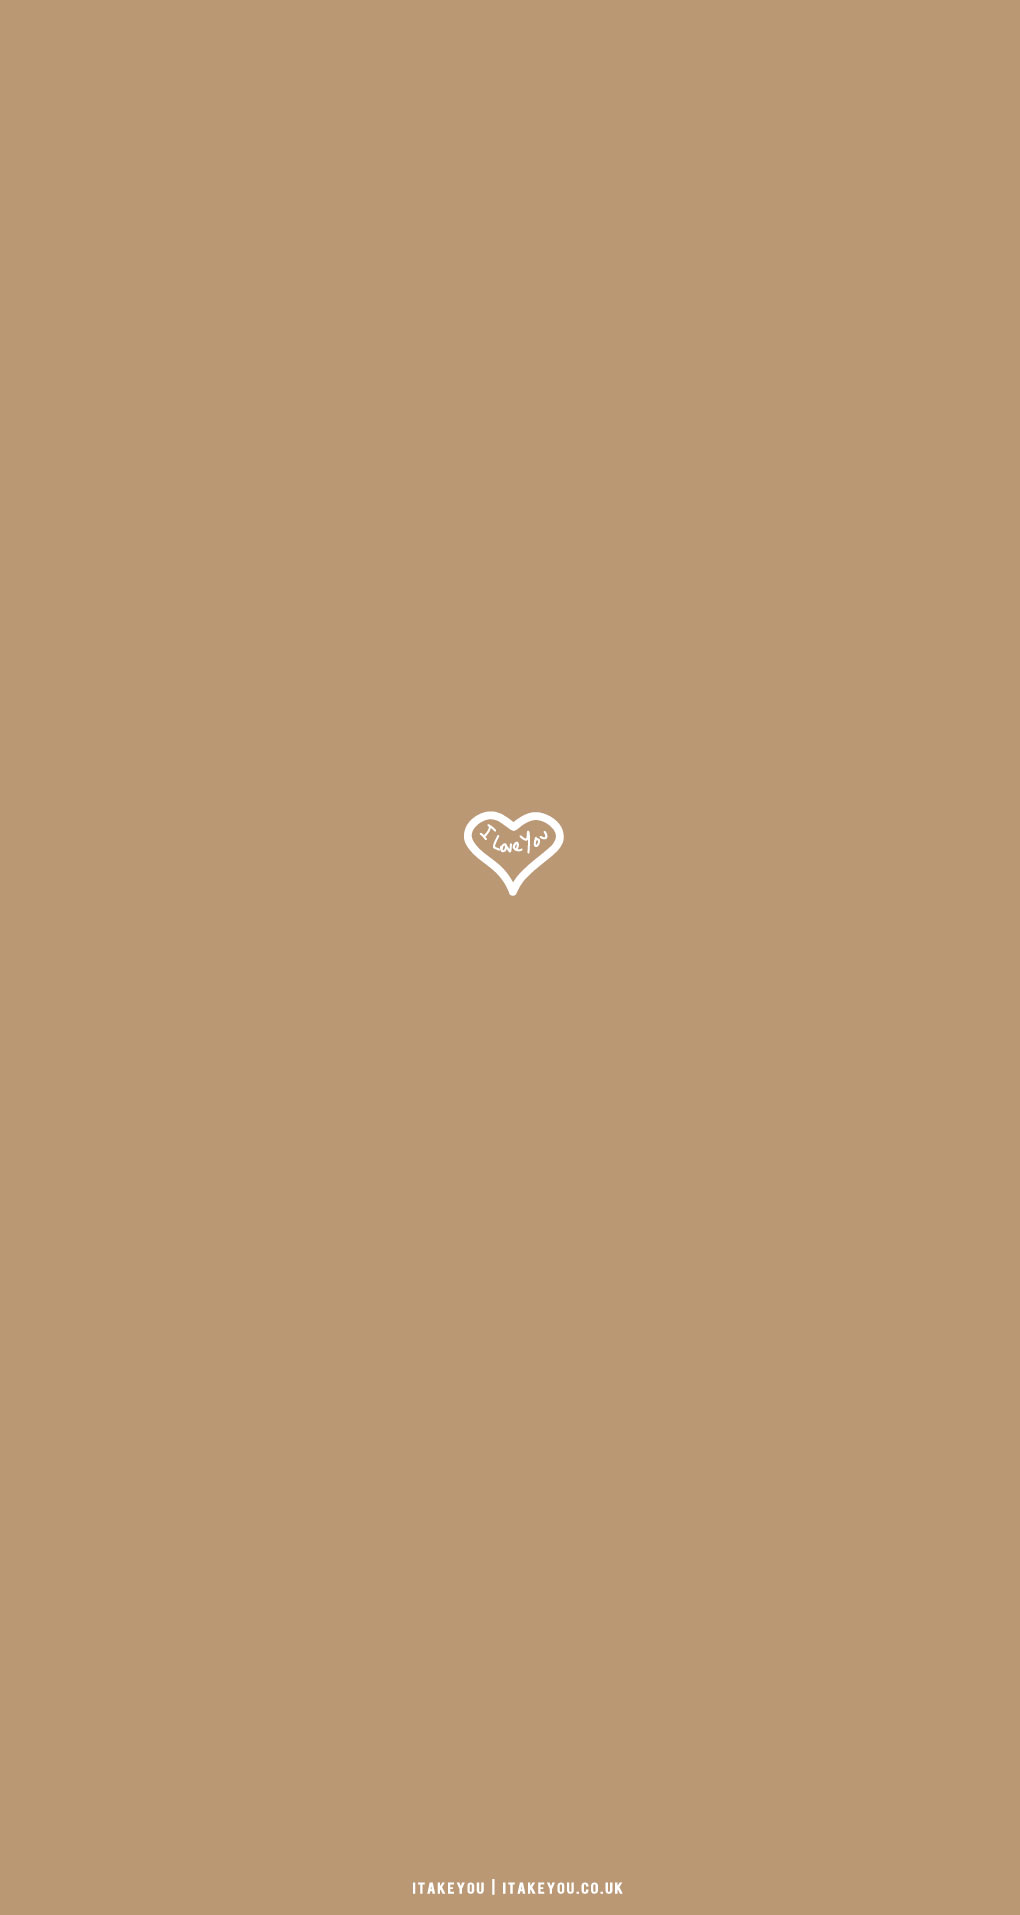 30 Cute Brown Aesthetic Wallpapers for Phone : Love Heart I Take You |  Wedding Readings | Wedding Ideas | Wedding Dresses | Wedding Theme